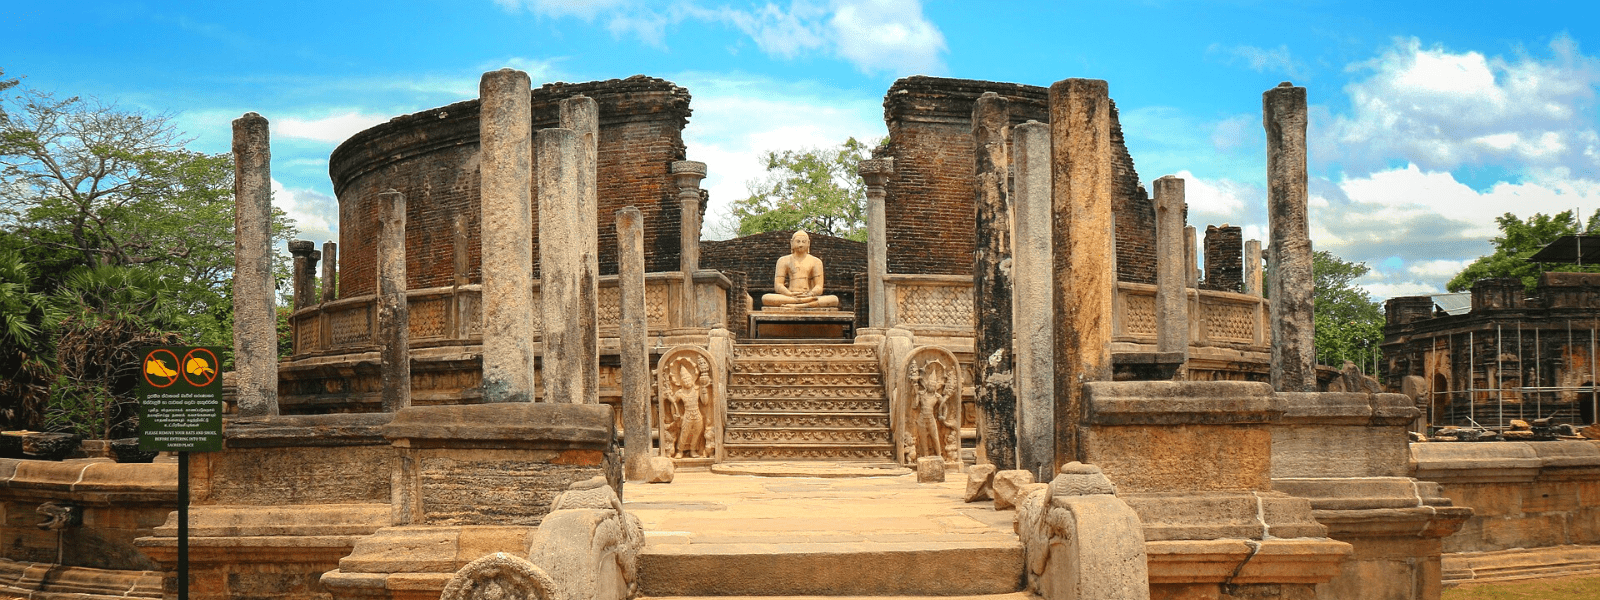 a historical place in sri lanka essay